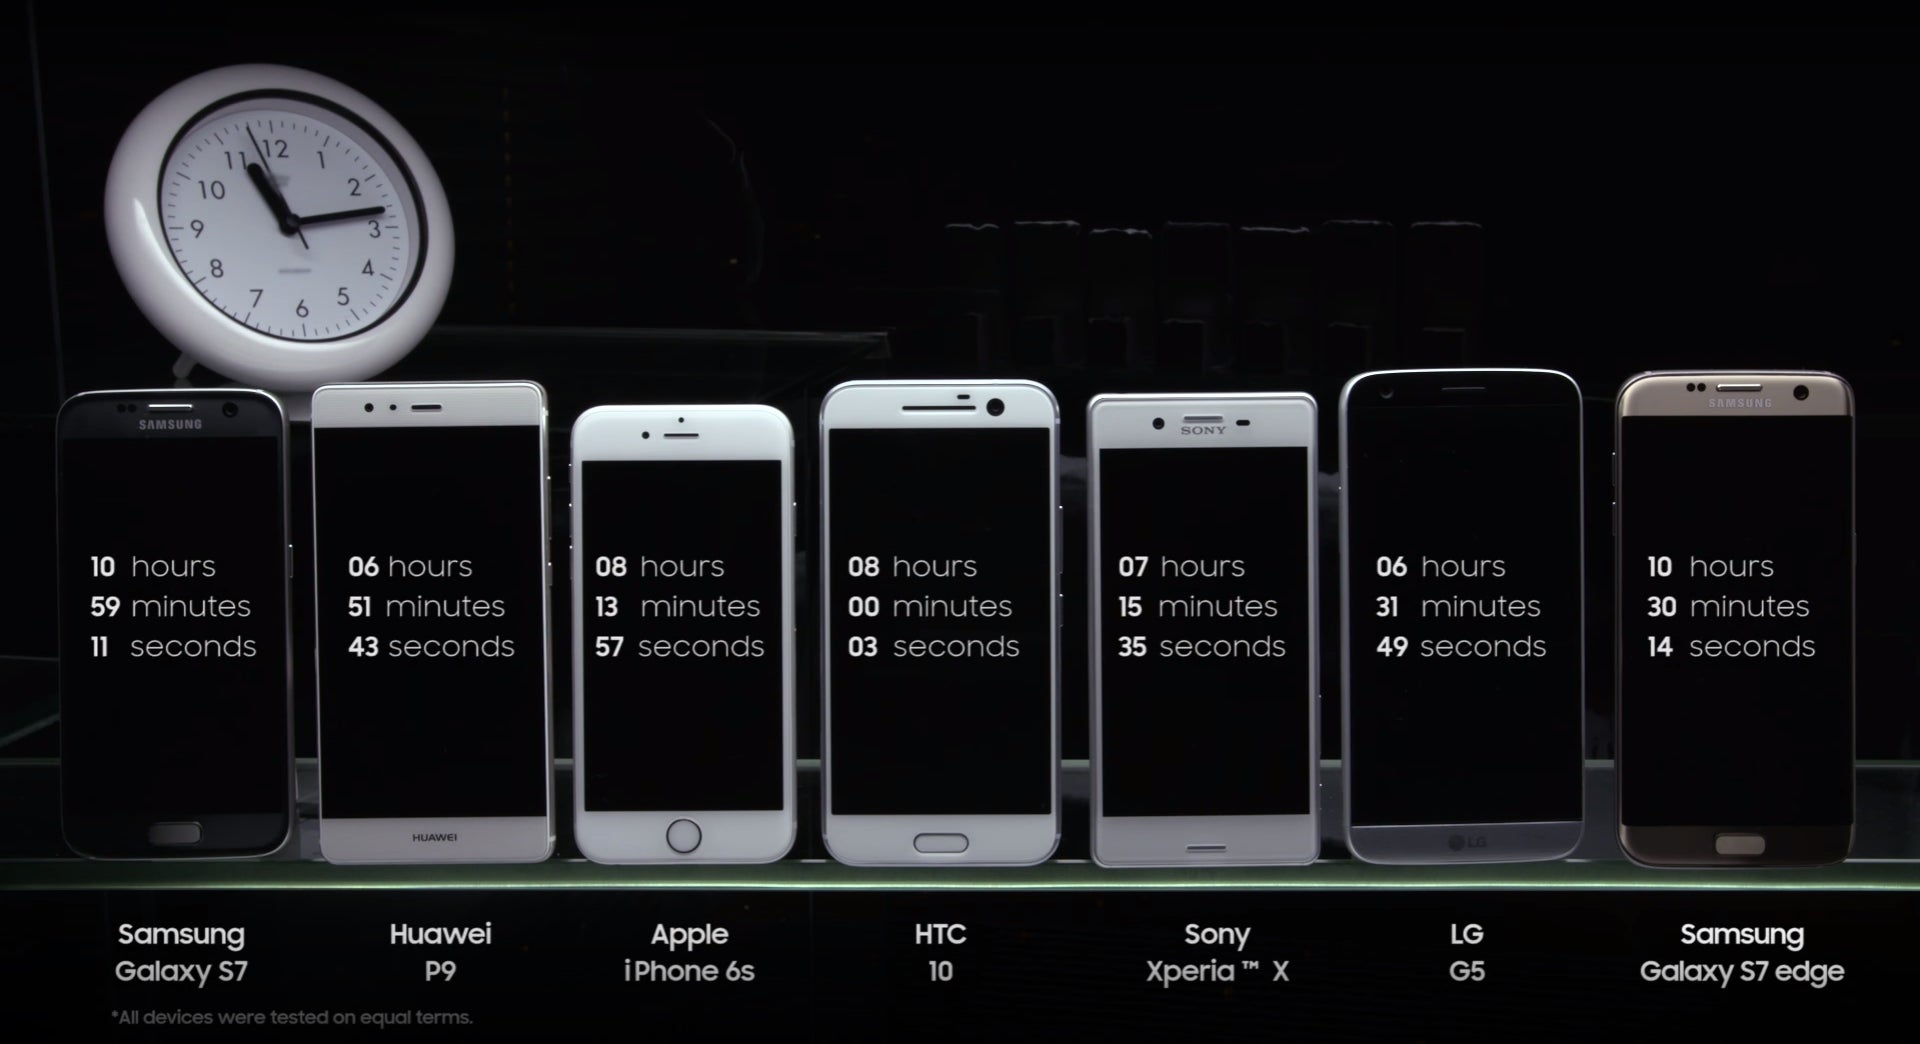 Samsung battery test video shows the Galaxy S7 crush the competition, but we are not convinced